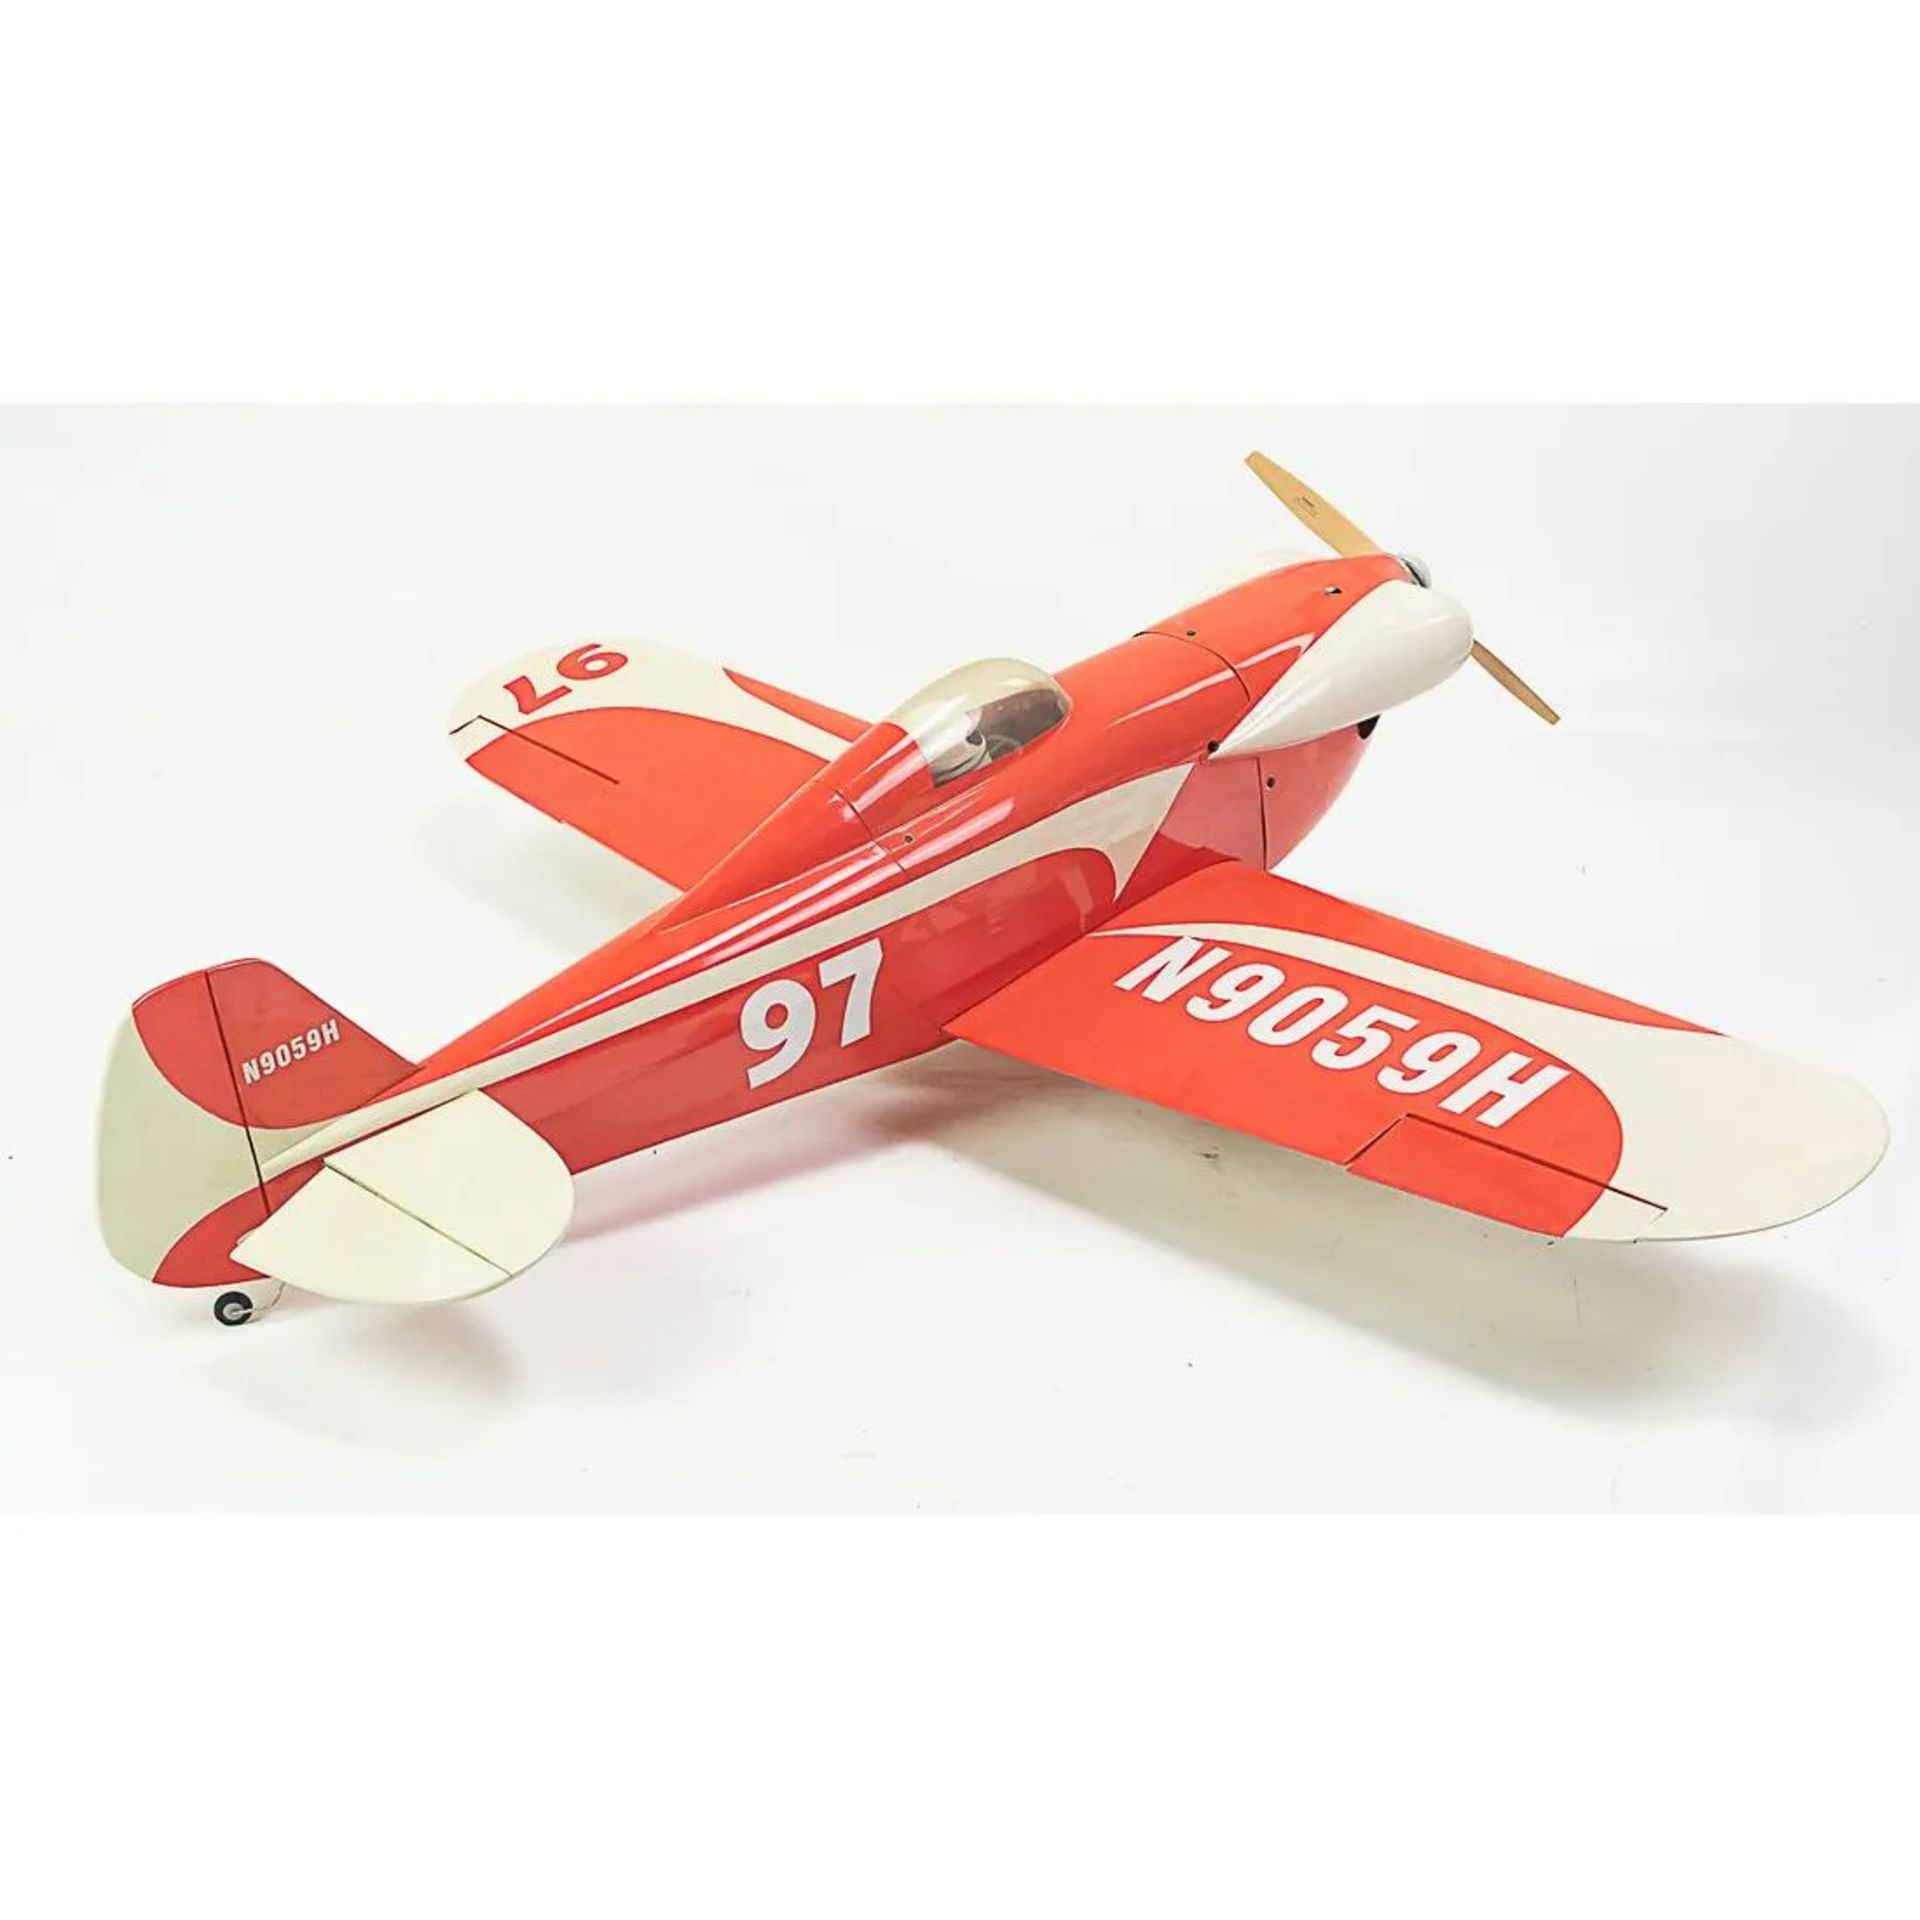 Very Large RC Low Wing Airplane without Motor/Servos - Image 8 of 8